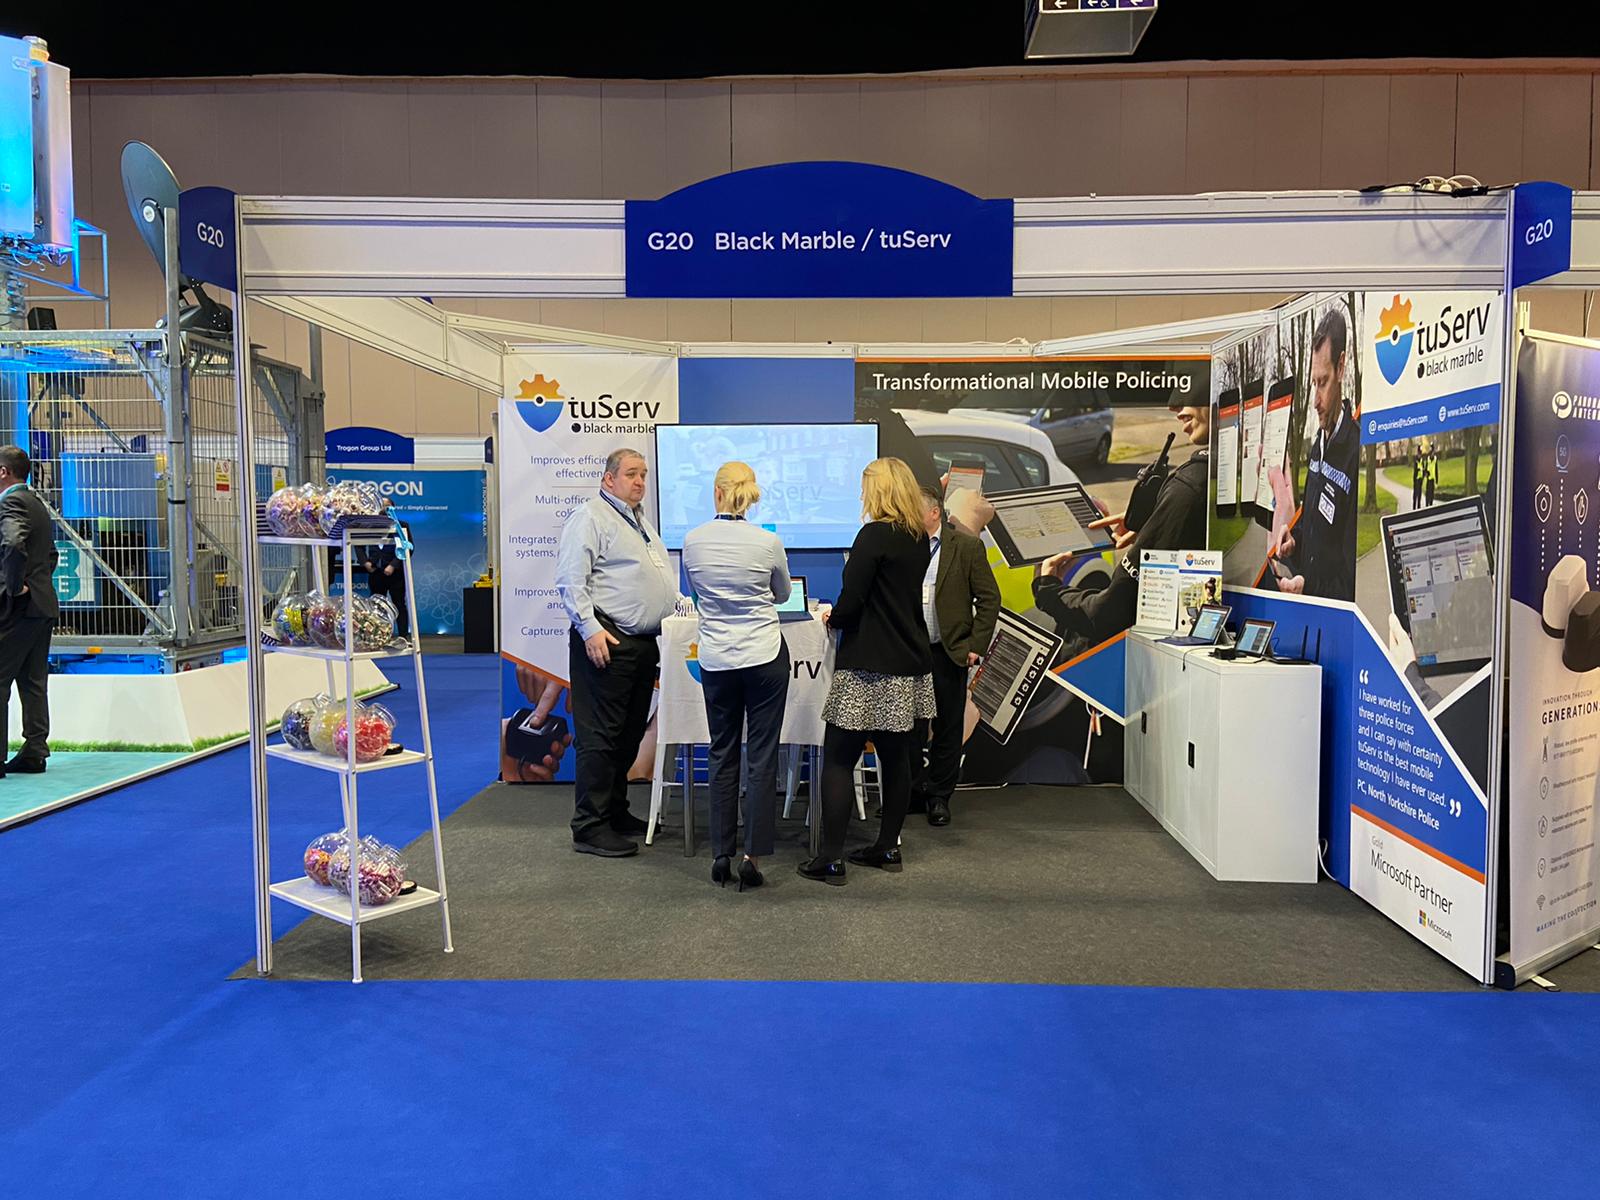 The Black Marble and tuServ Stand at BAPCO